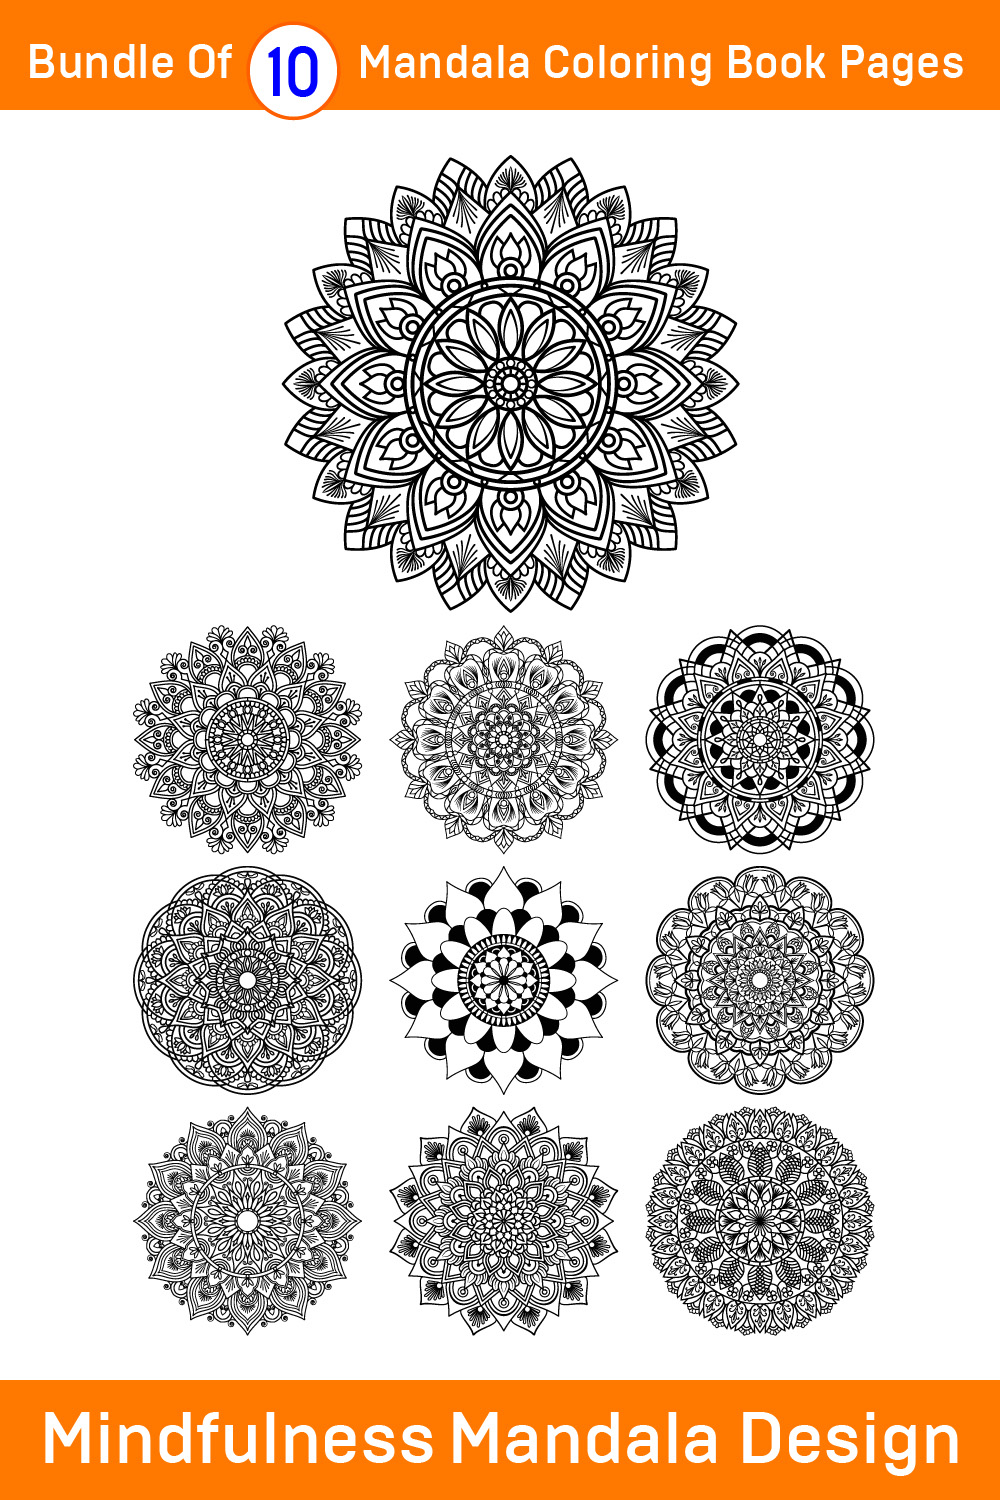 Bundle of 10 Mindfulness Mandalas for Paper Cutting or Coloring Books pinterest preview image.